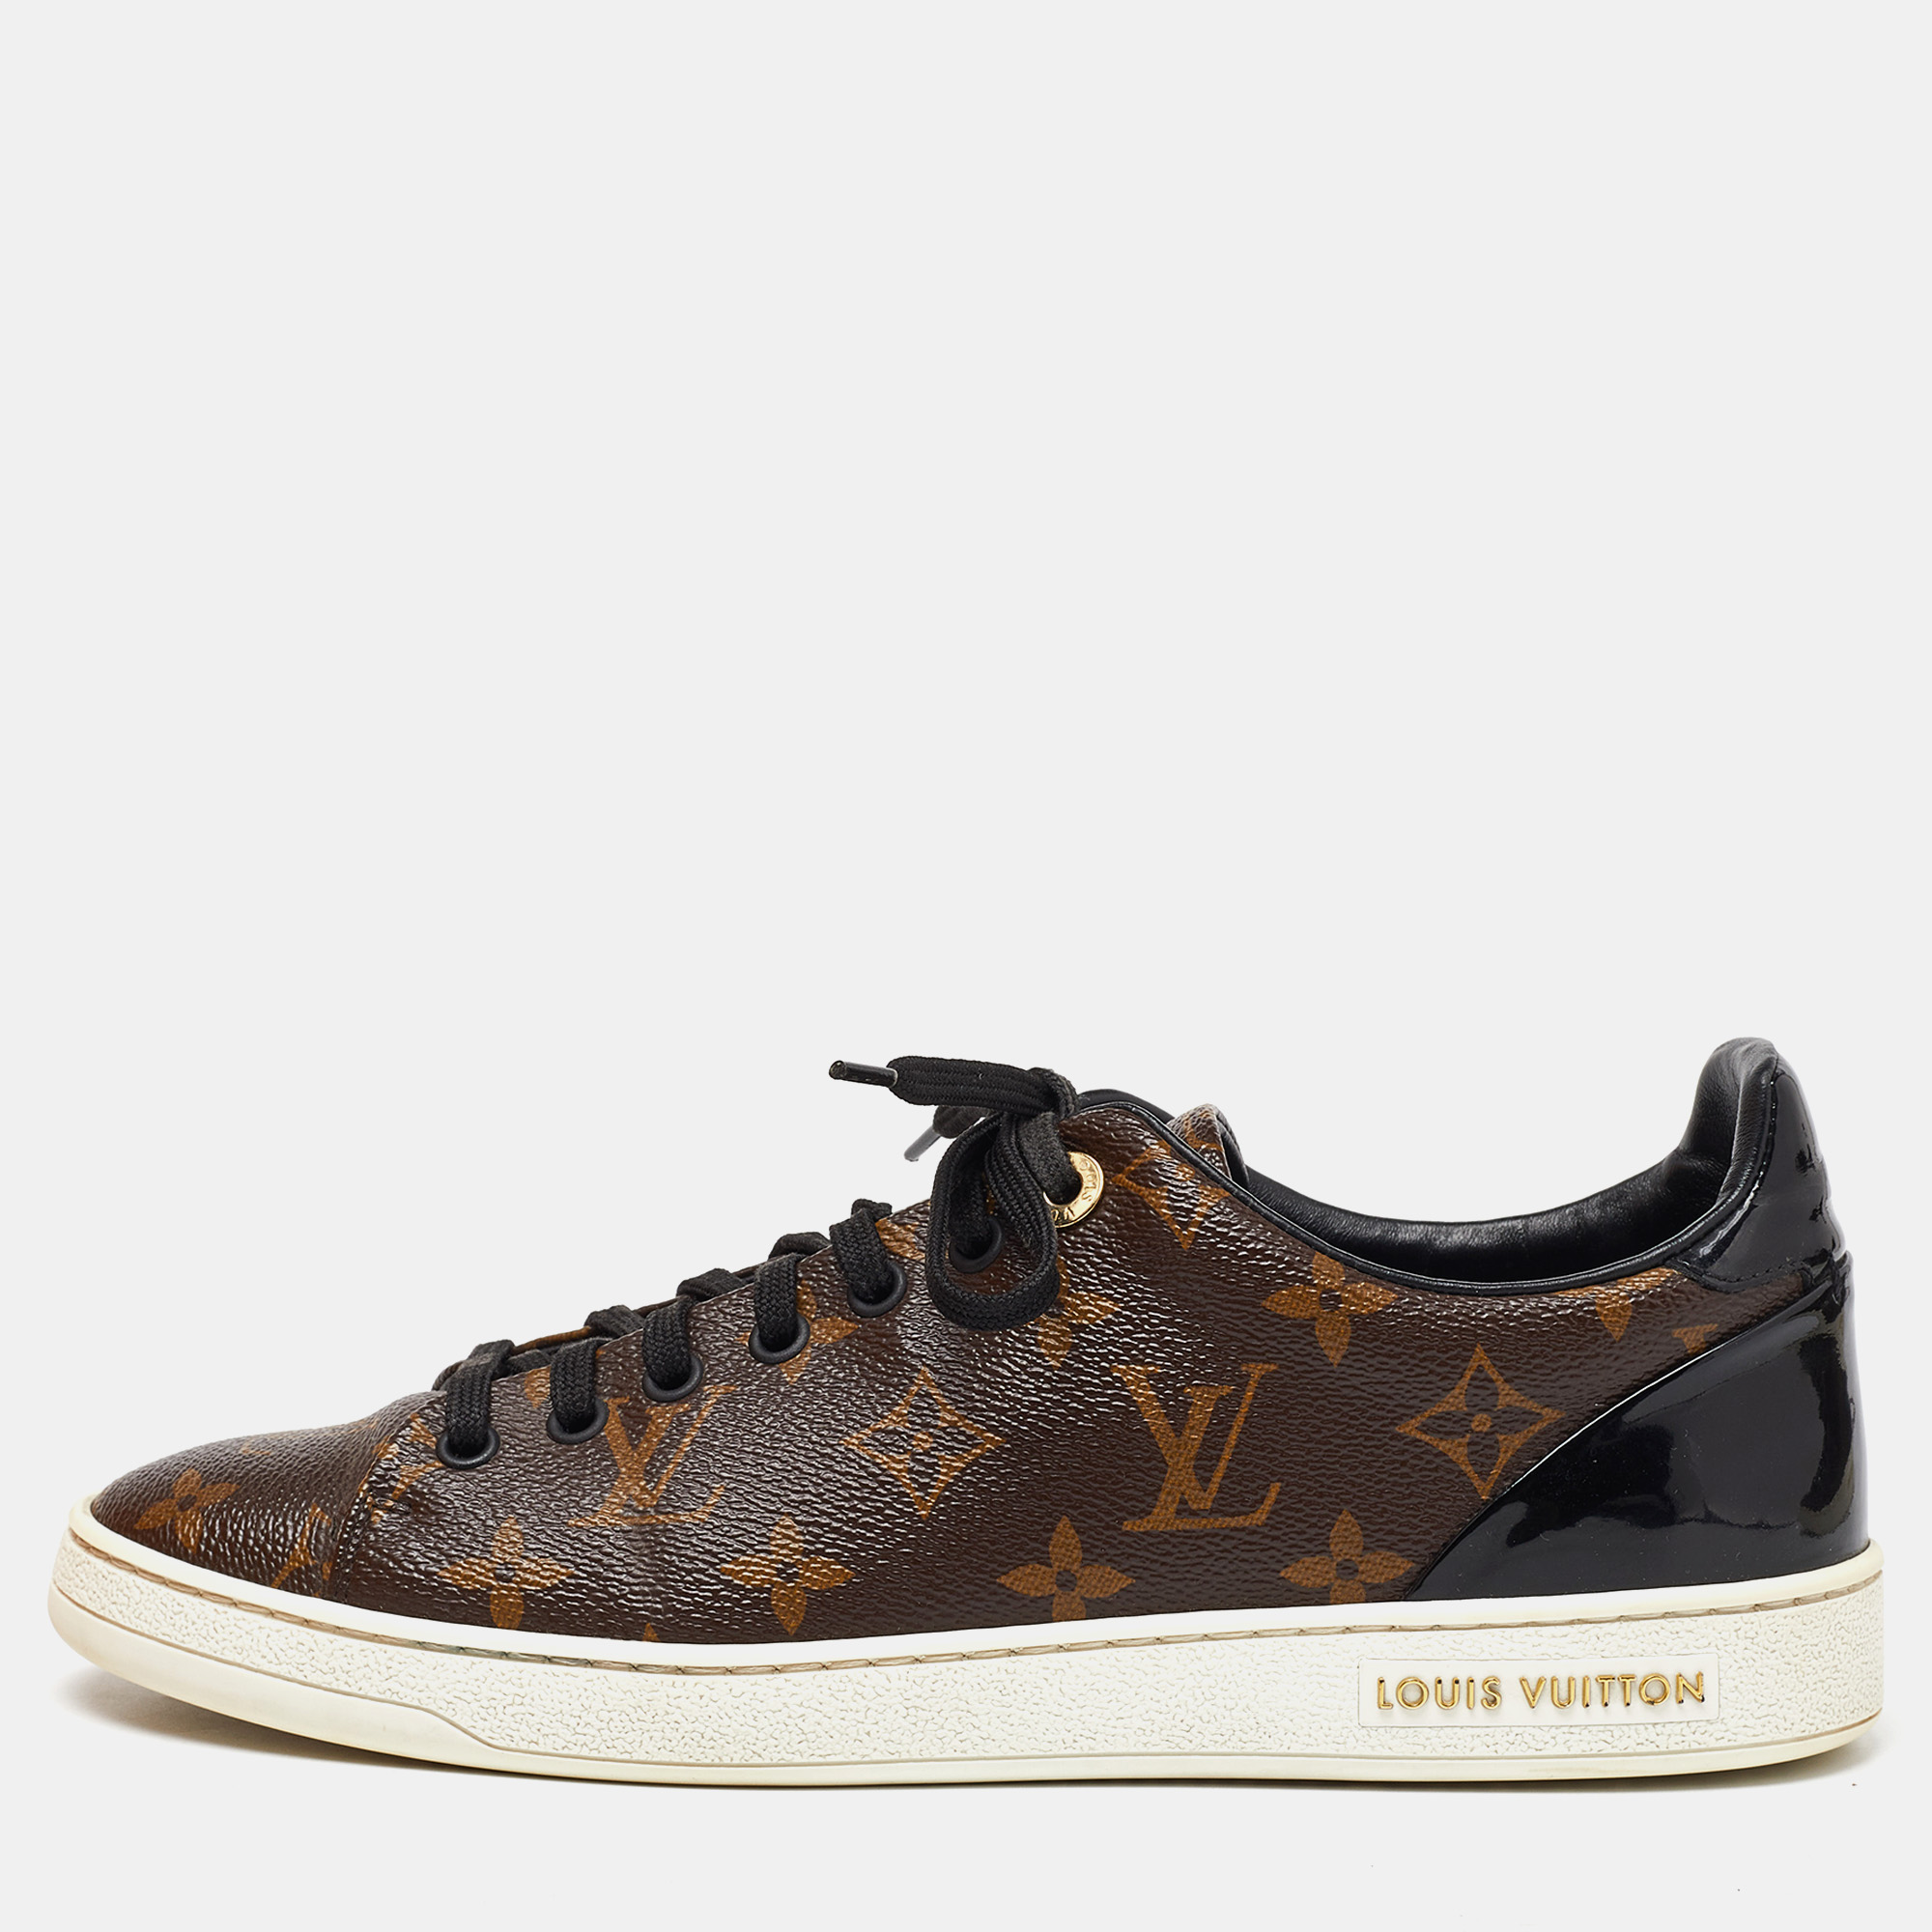 Louis vuitton brown monogram canvas frontrow low top sneakers size 40